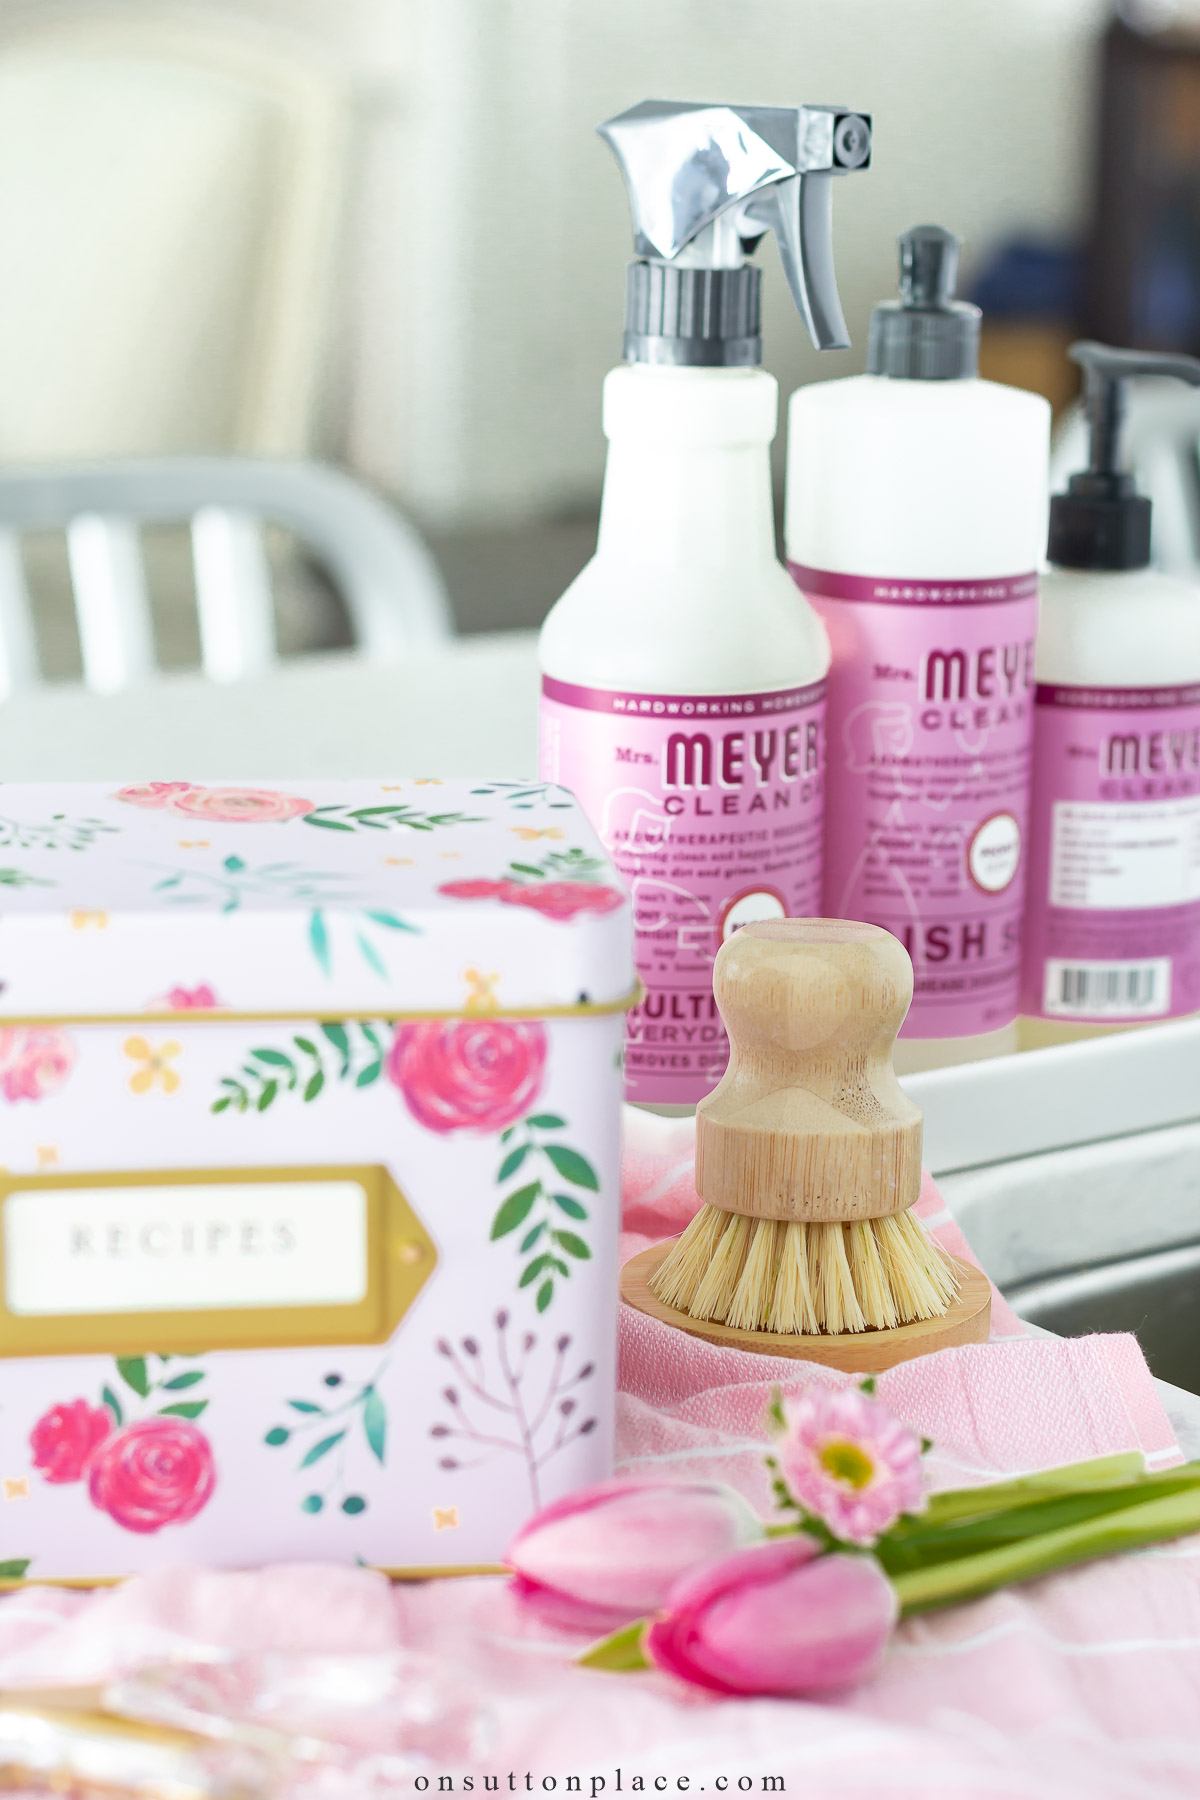 Free Mrs. Meyers Cleaning Set  Grove Collaborative - The Everyday Farmhouse